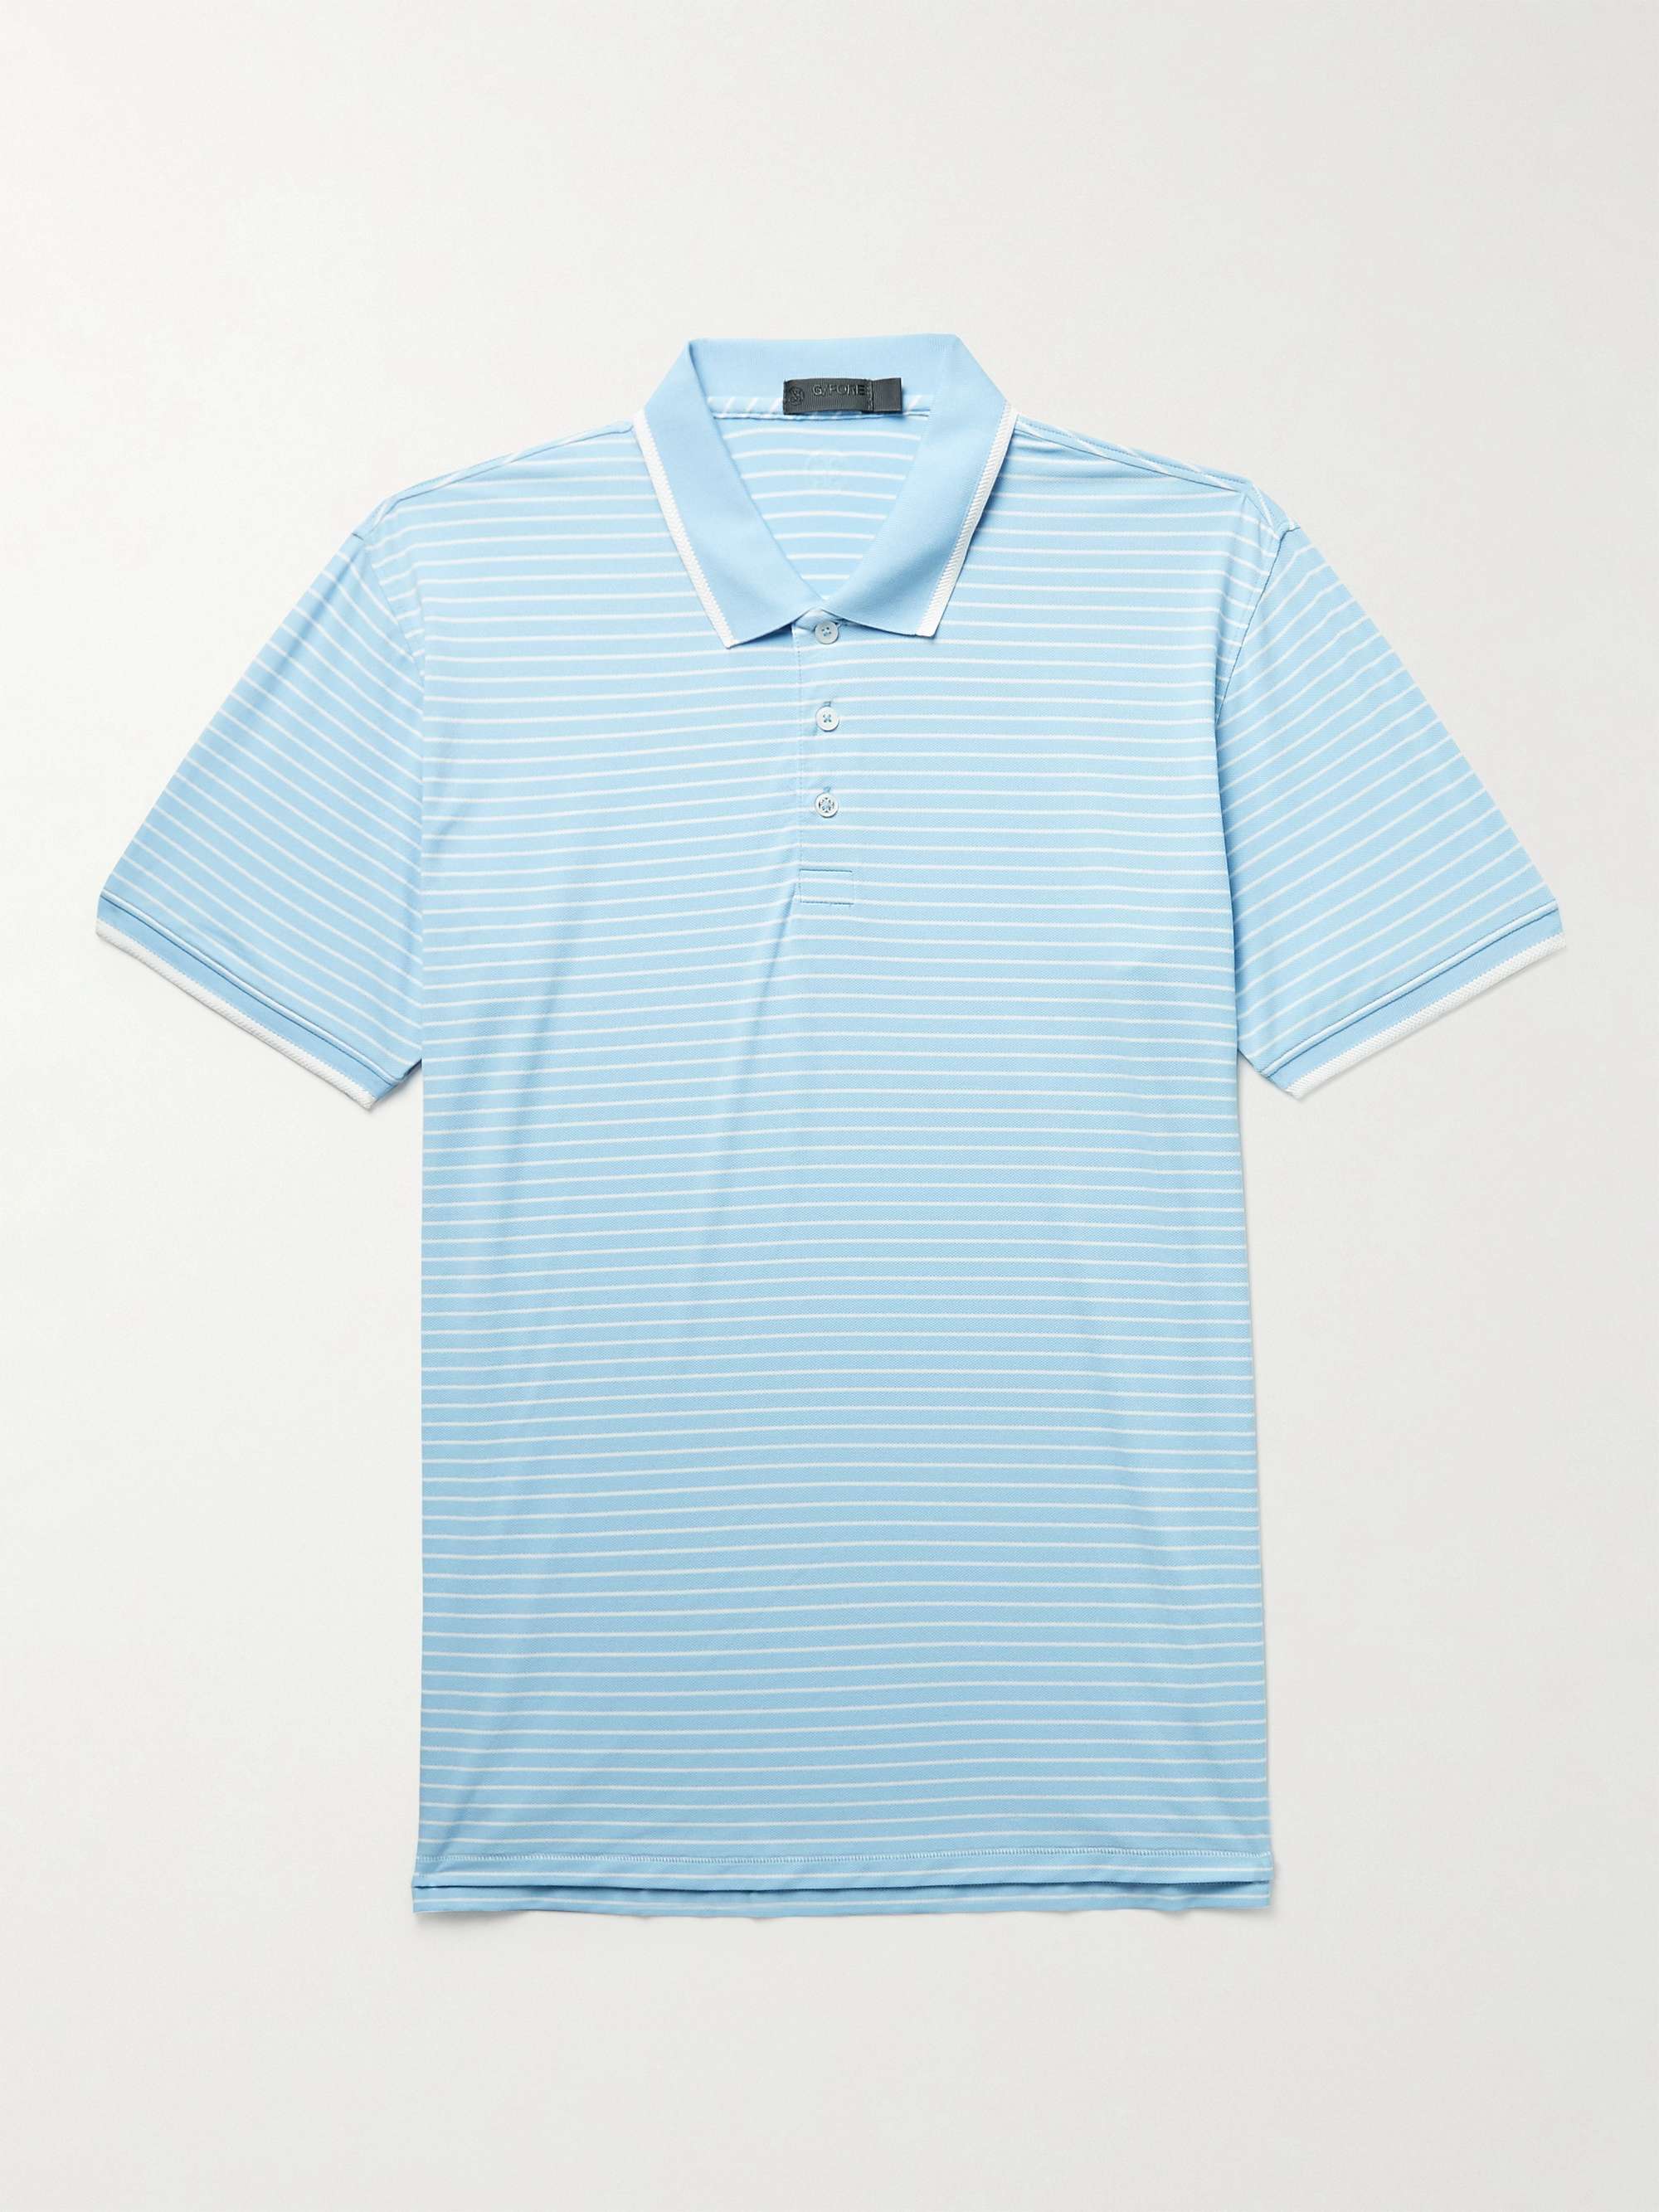 Striped Perforated Stretch-Jersey Golf Polo Shirt